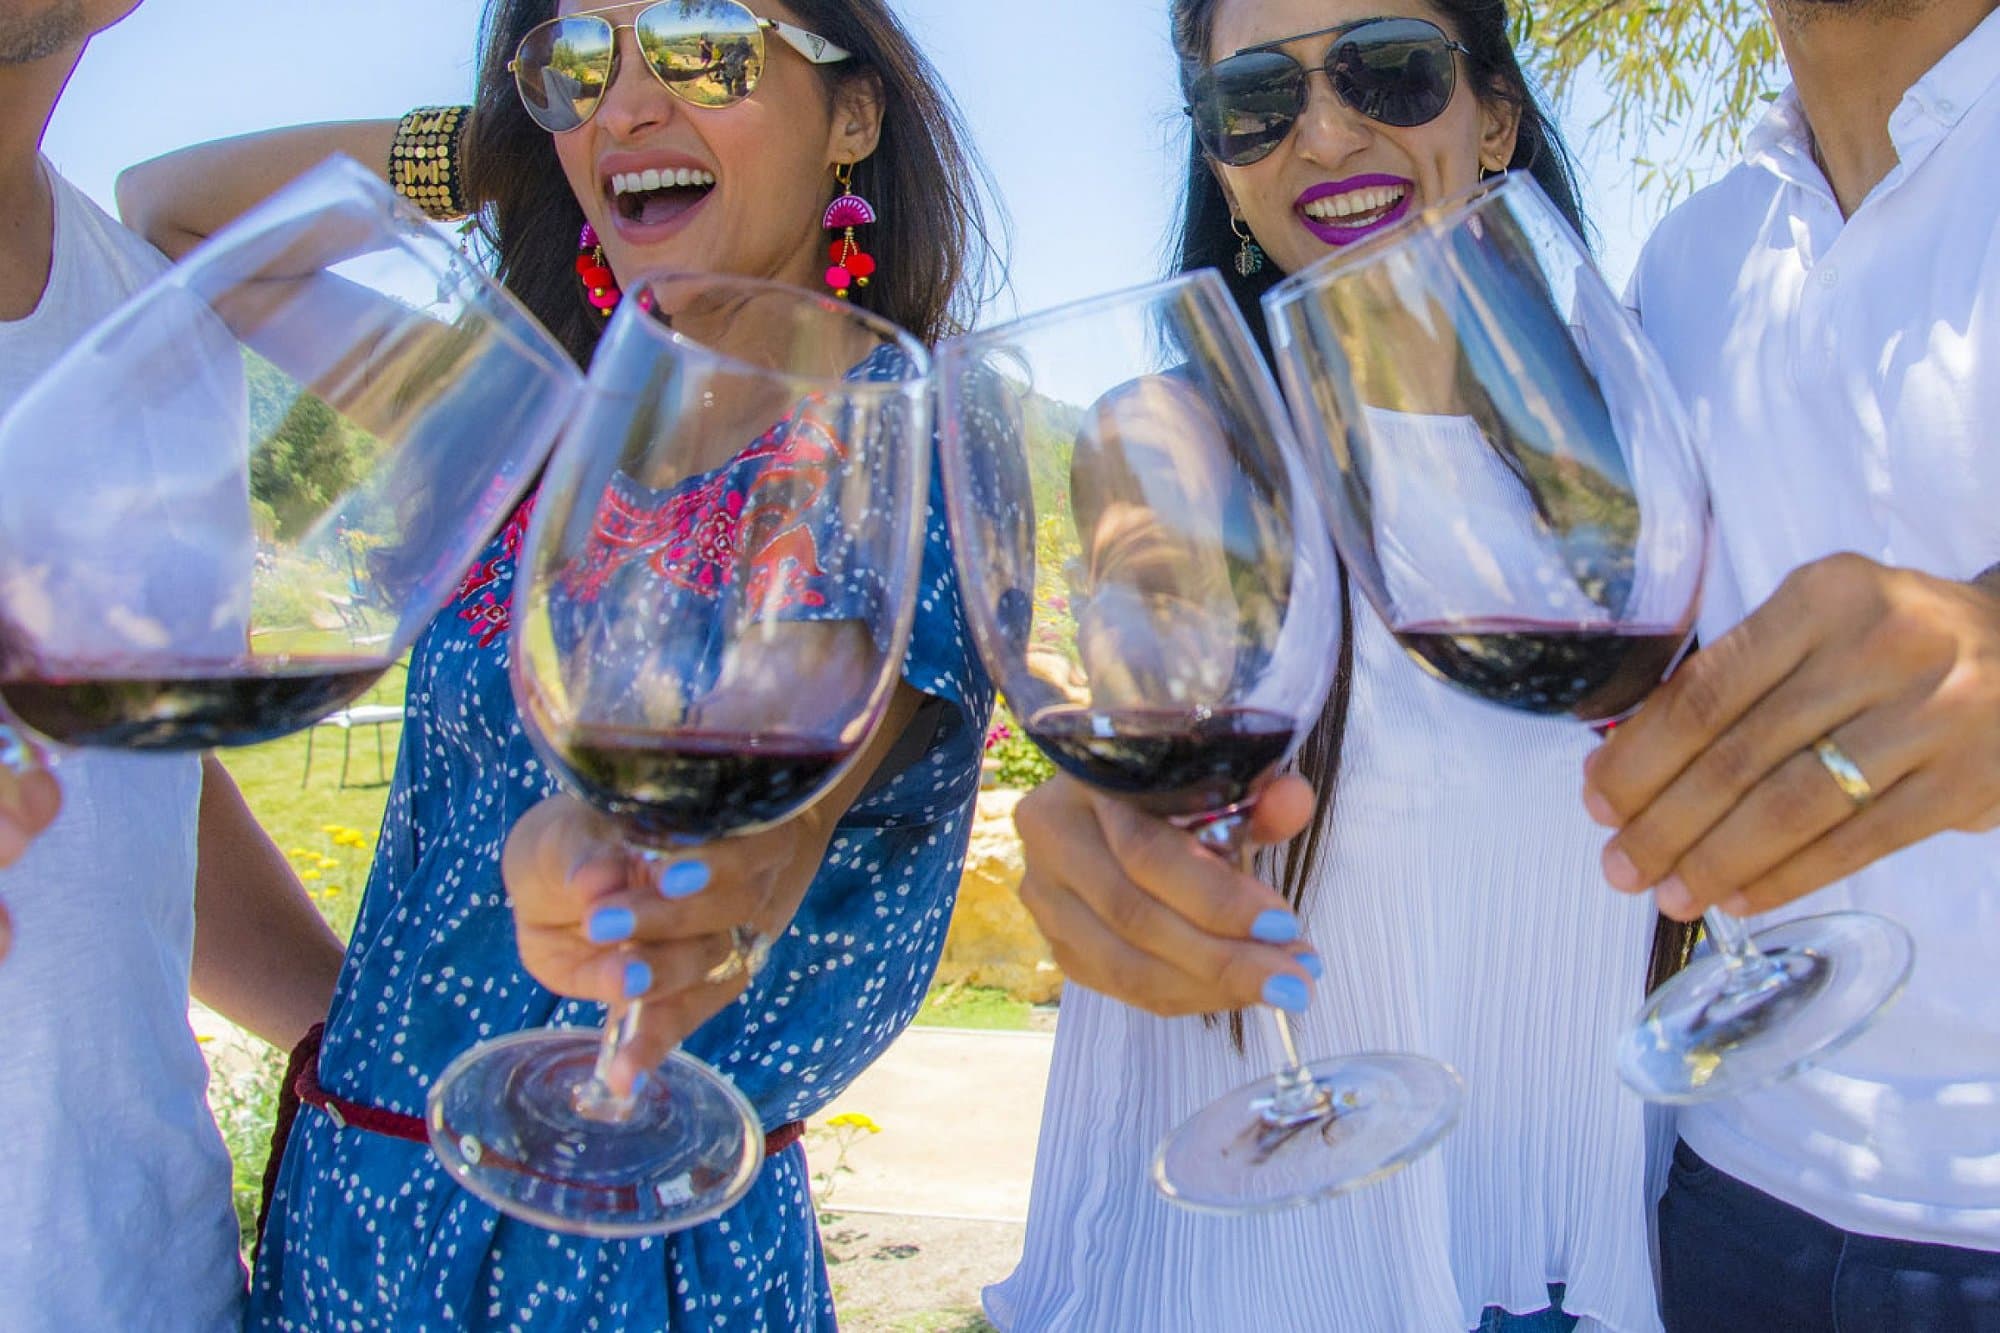 "Love everything about my Membership! I feel like I am an appreciated member of Daou and that is wonderful. And of course....the wines are outstanding!!"